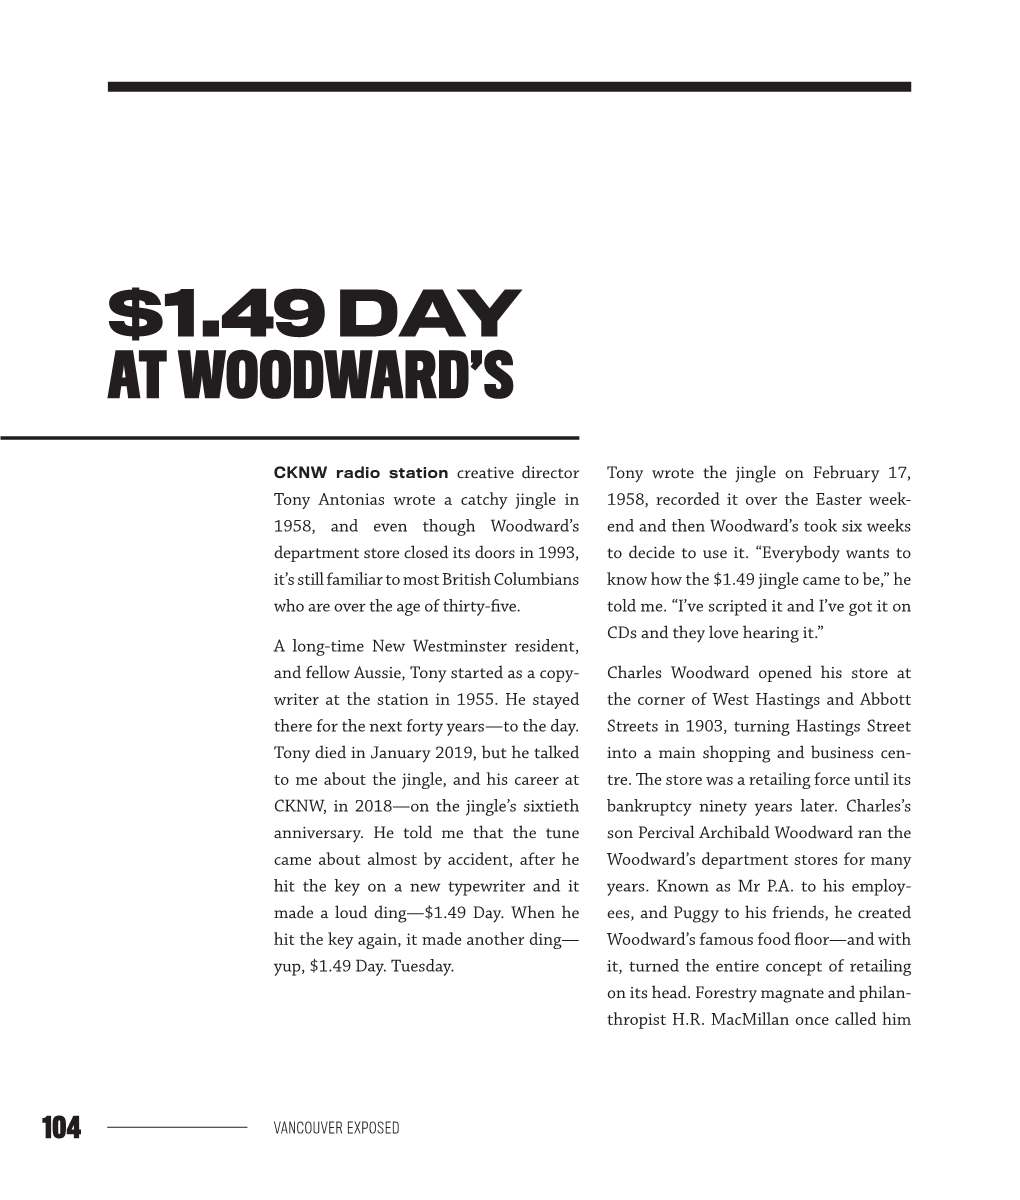 $1.49 Day at Woodward's